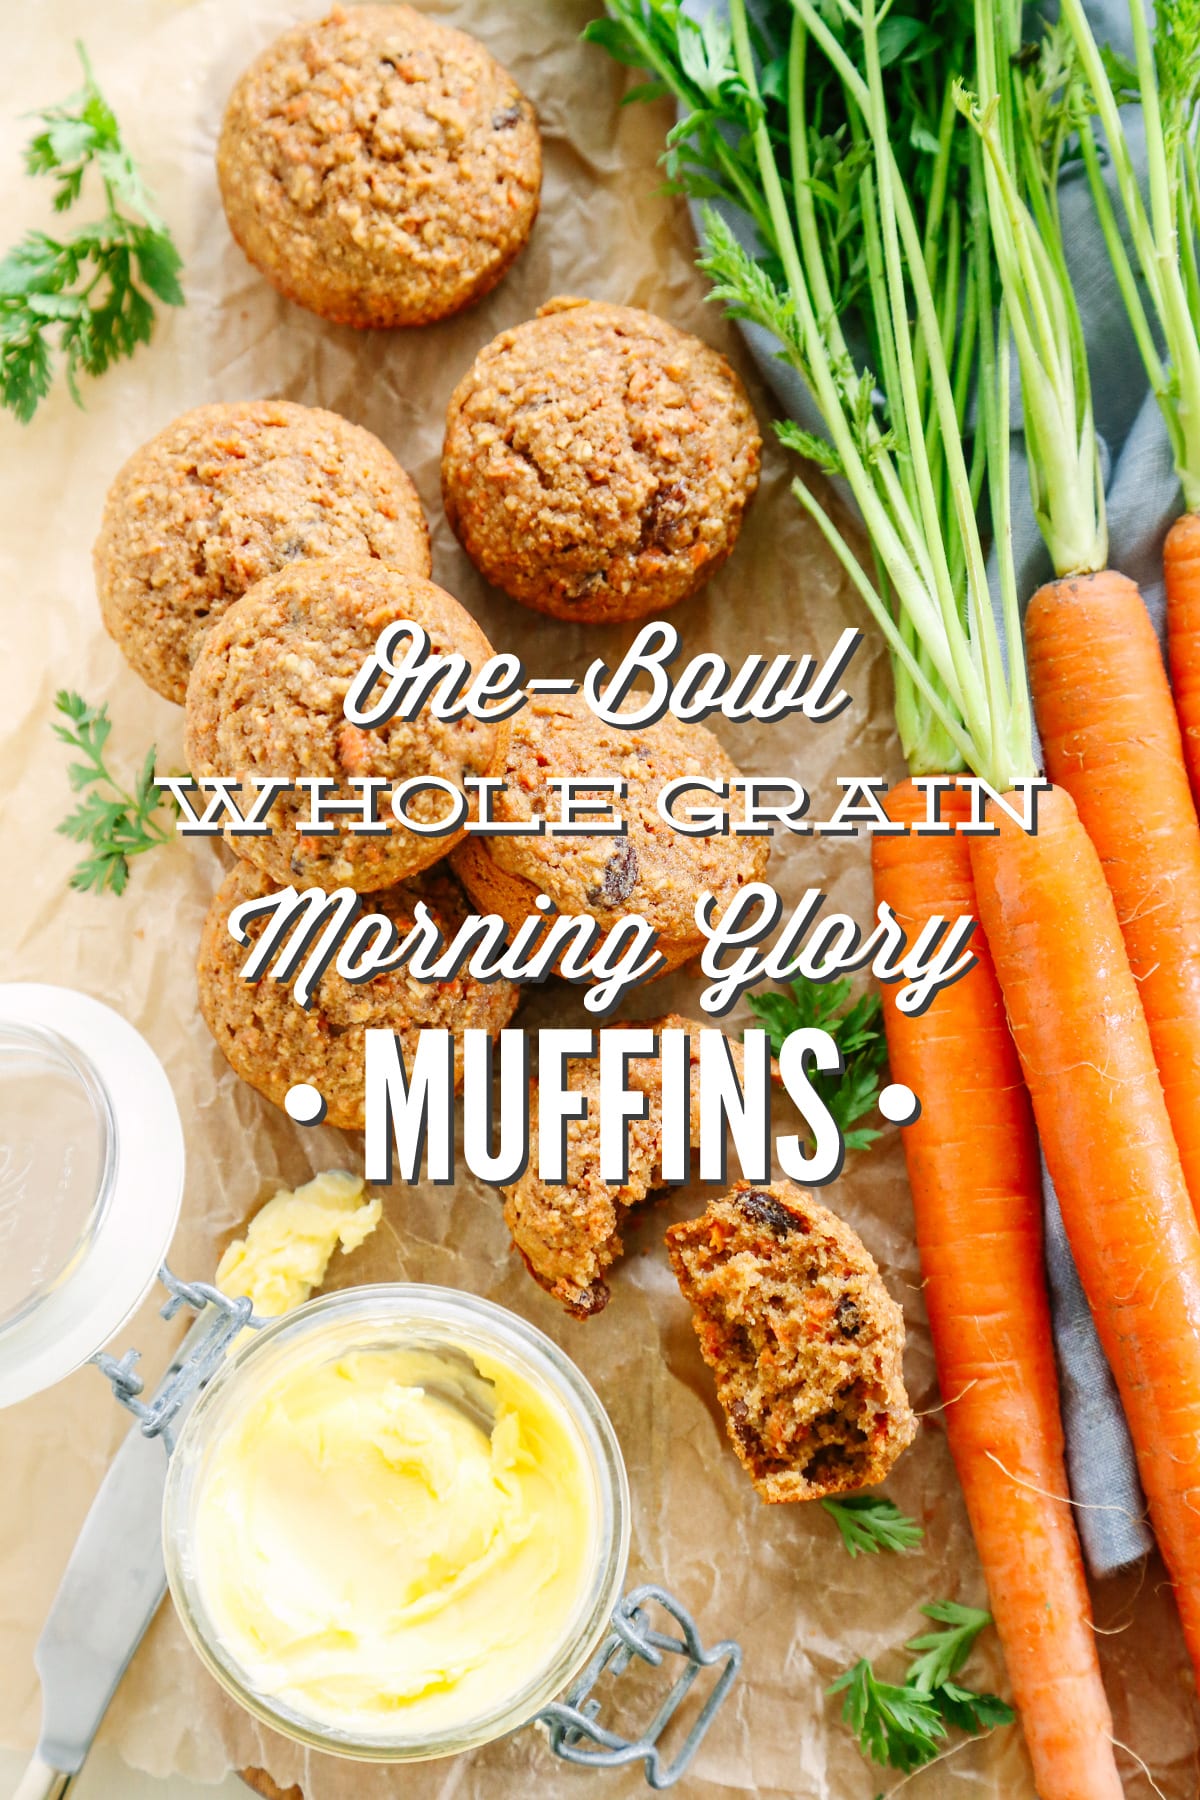 One-Bowl Whole Grain Morning Glory Muffins